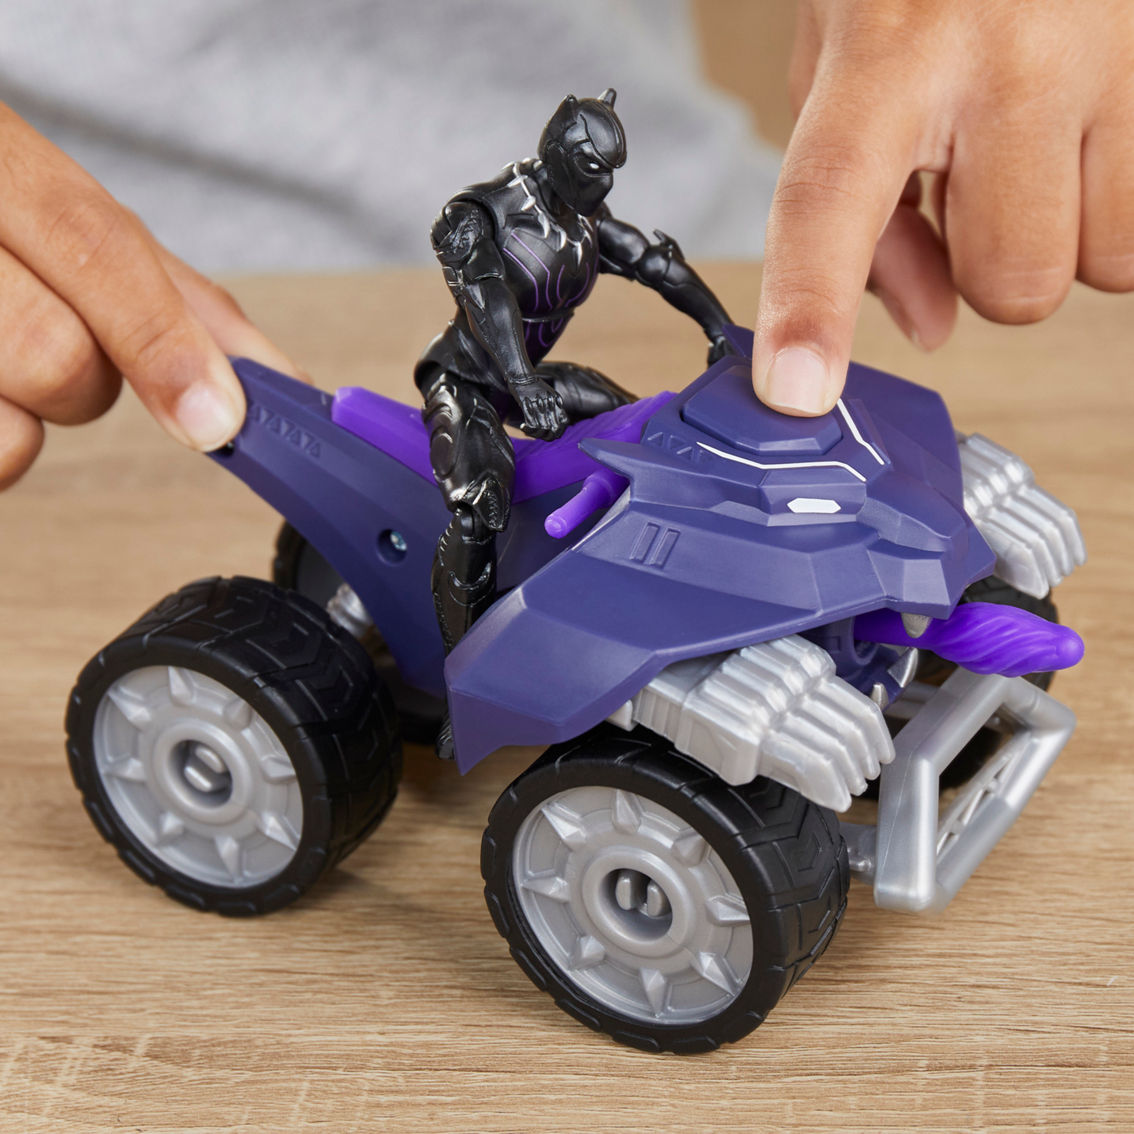 Marvel Avengers Epic Hero Series Black Panther Claw Strike ATV Toy - Image 4 of 6